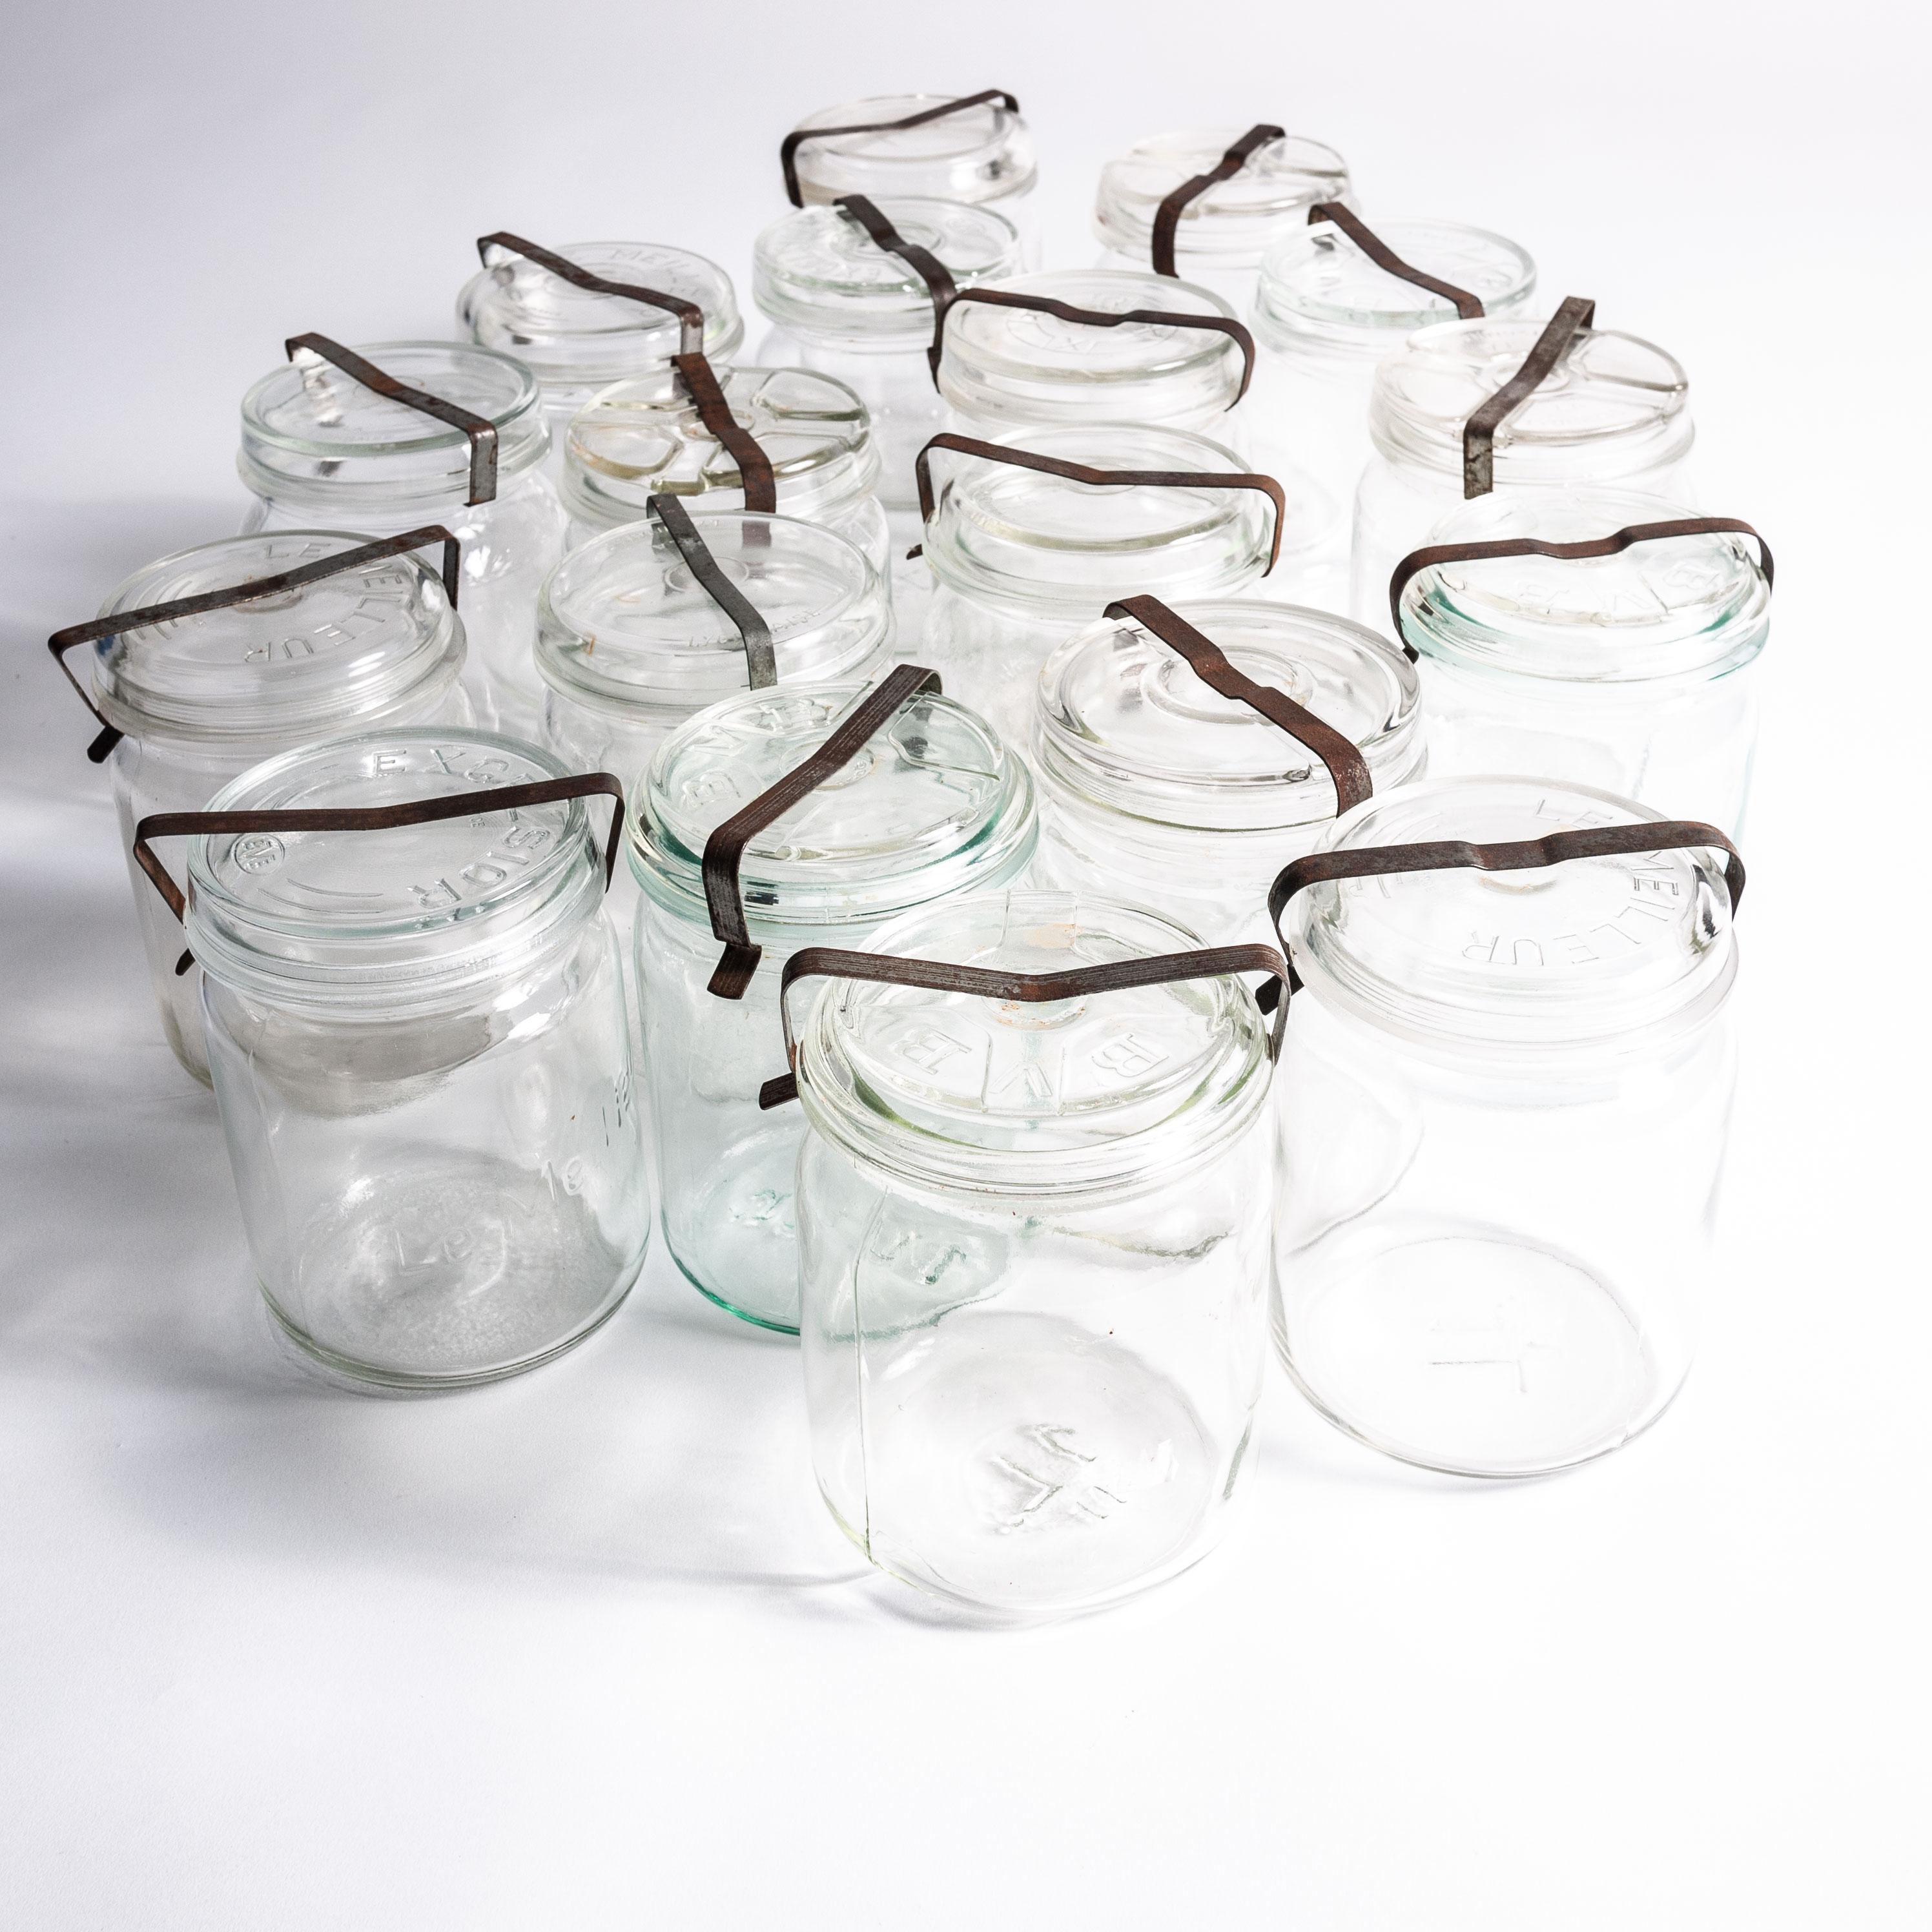 Late 20th Century 1970s Decorative French Preserving Jars